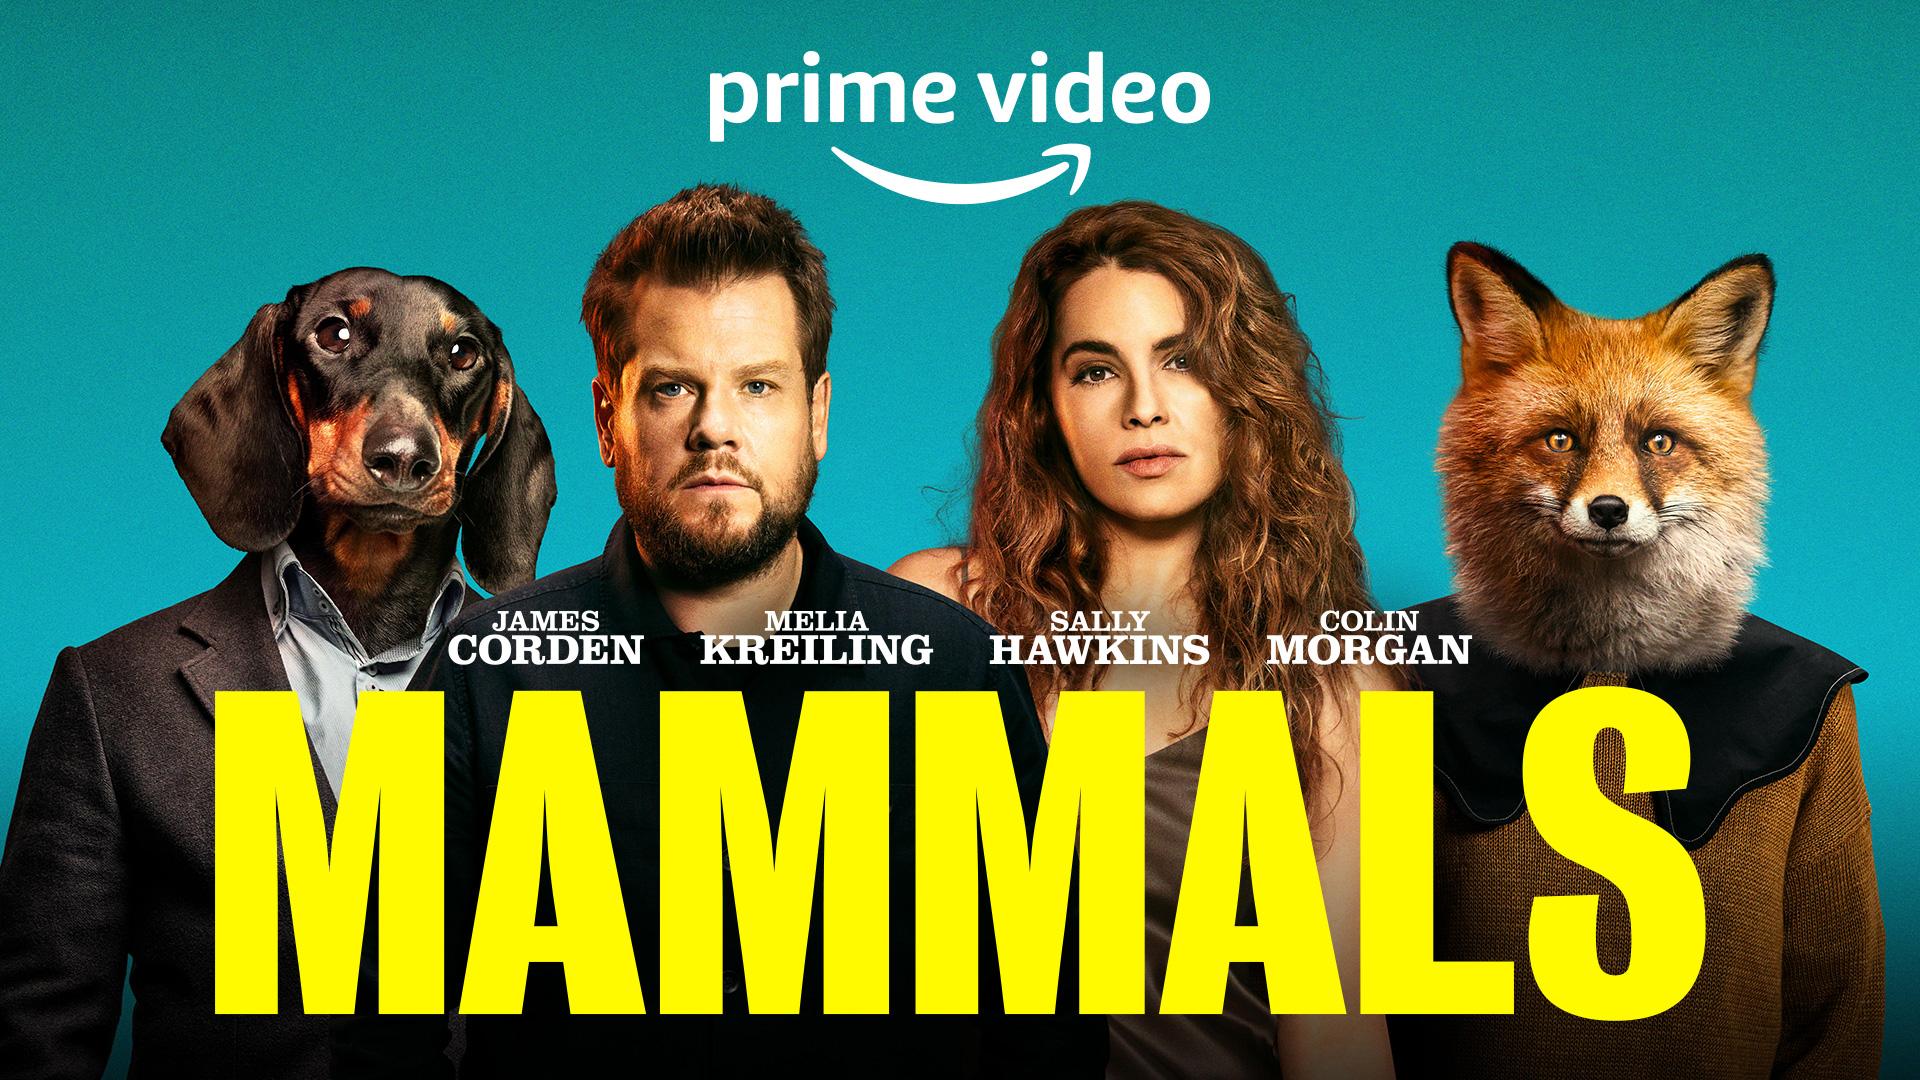 Prime Video Debuts Official Trailer for Mammals Starring James Corden and Sally Hawkins. All Six Episodes of Mammals Premiering This Friday November 11 on Prime Video.